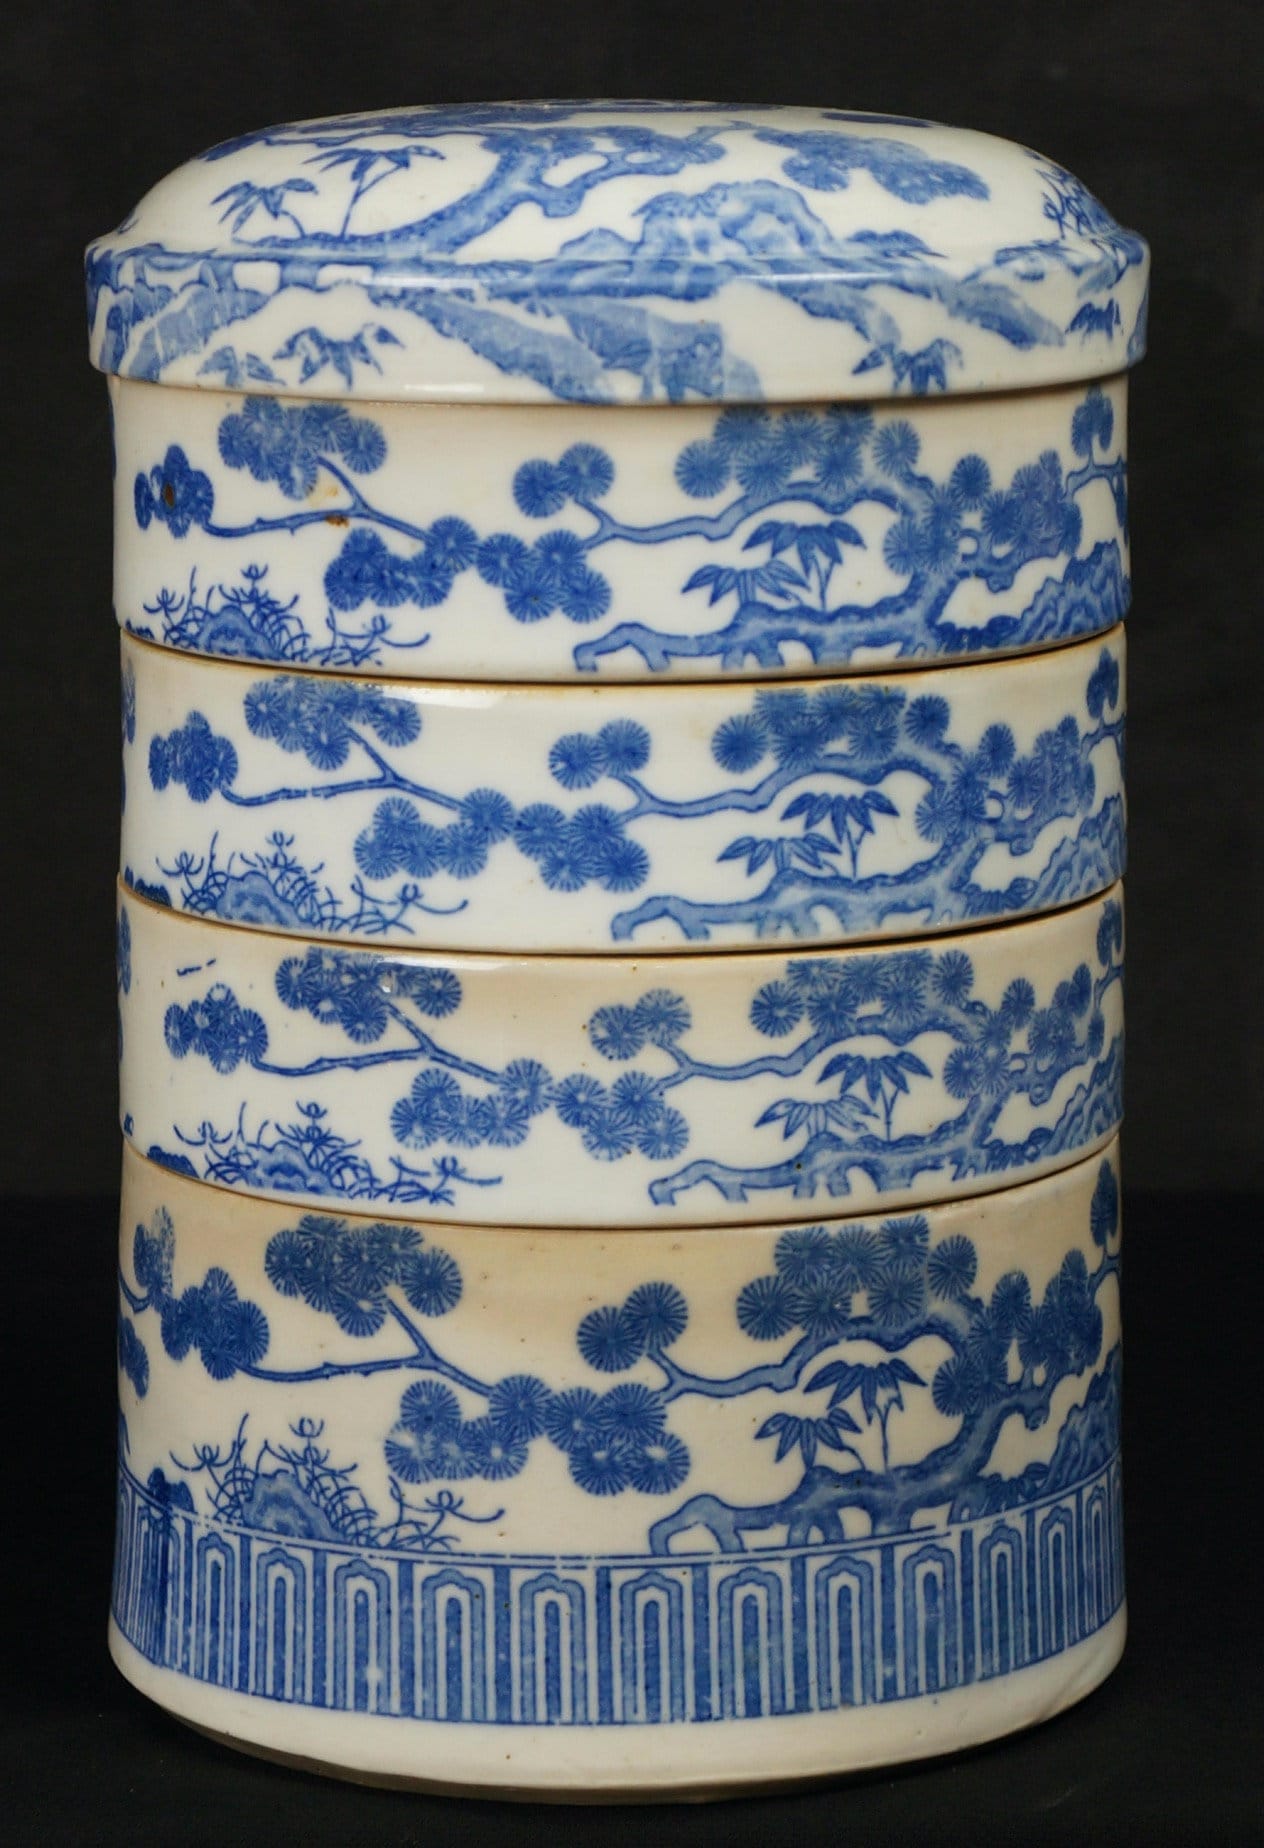 Japanese Ceramic Bento Box Three Tiers Stackable Blue And White 5 1/2x5